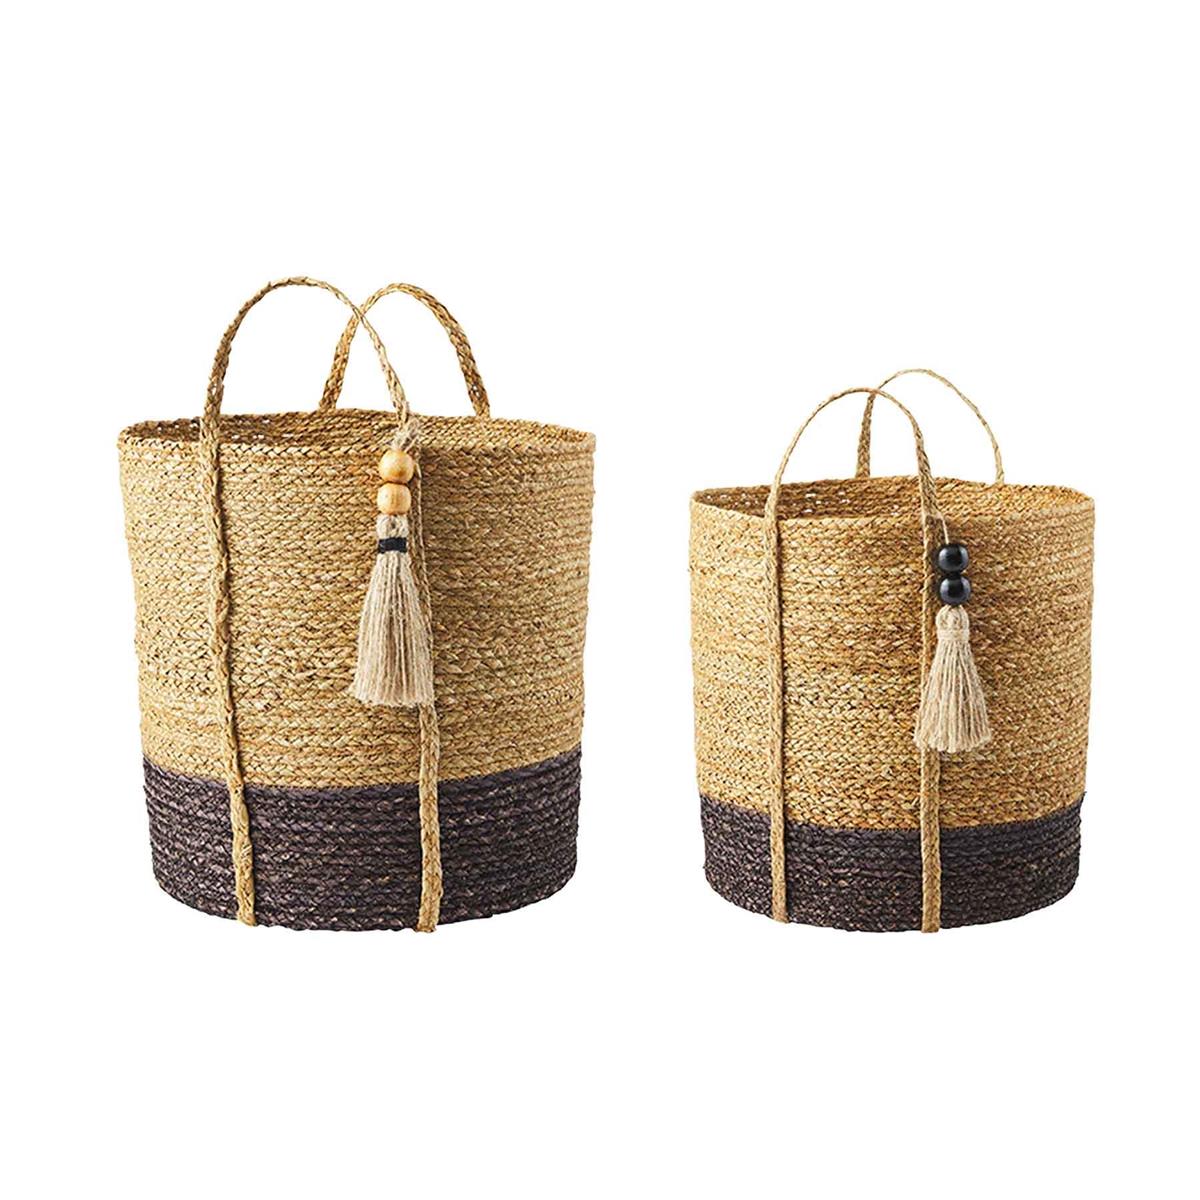 small and large two-toned seagrass basket on a white background